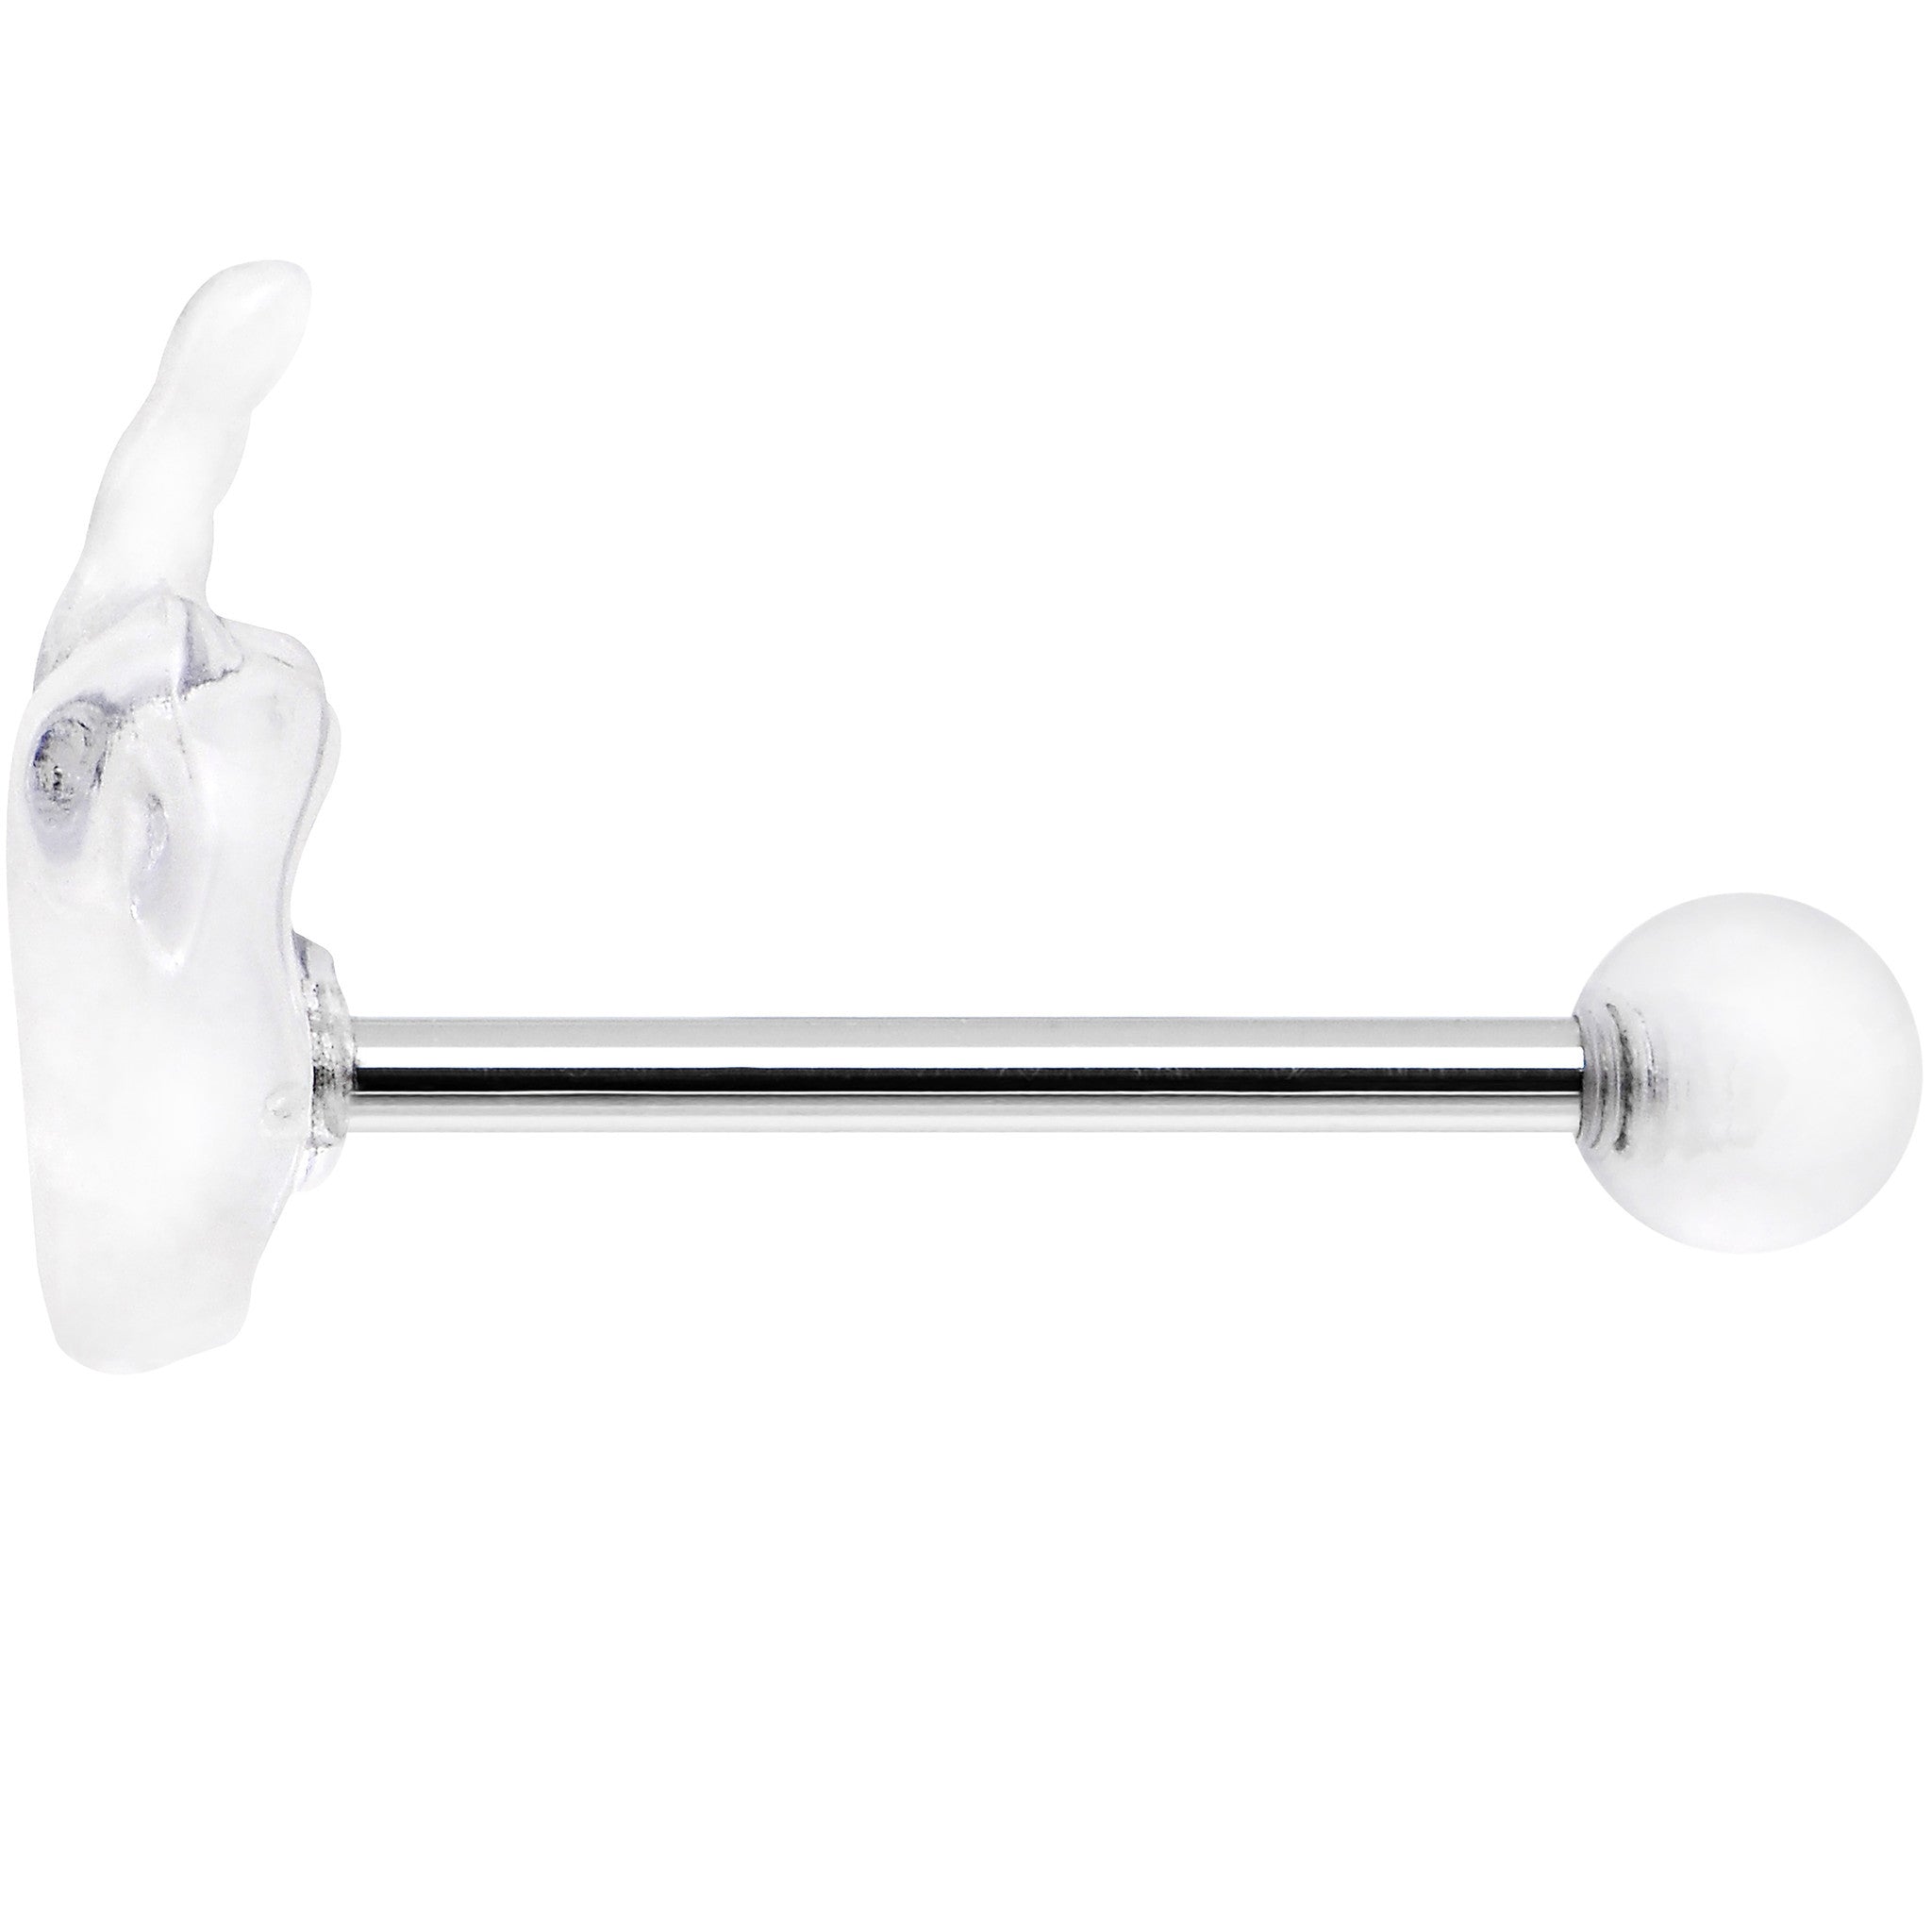 14 Gauge 5/8 Clear Acrylic Flip the Middle Finger Barbell Tongue Ring